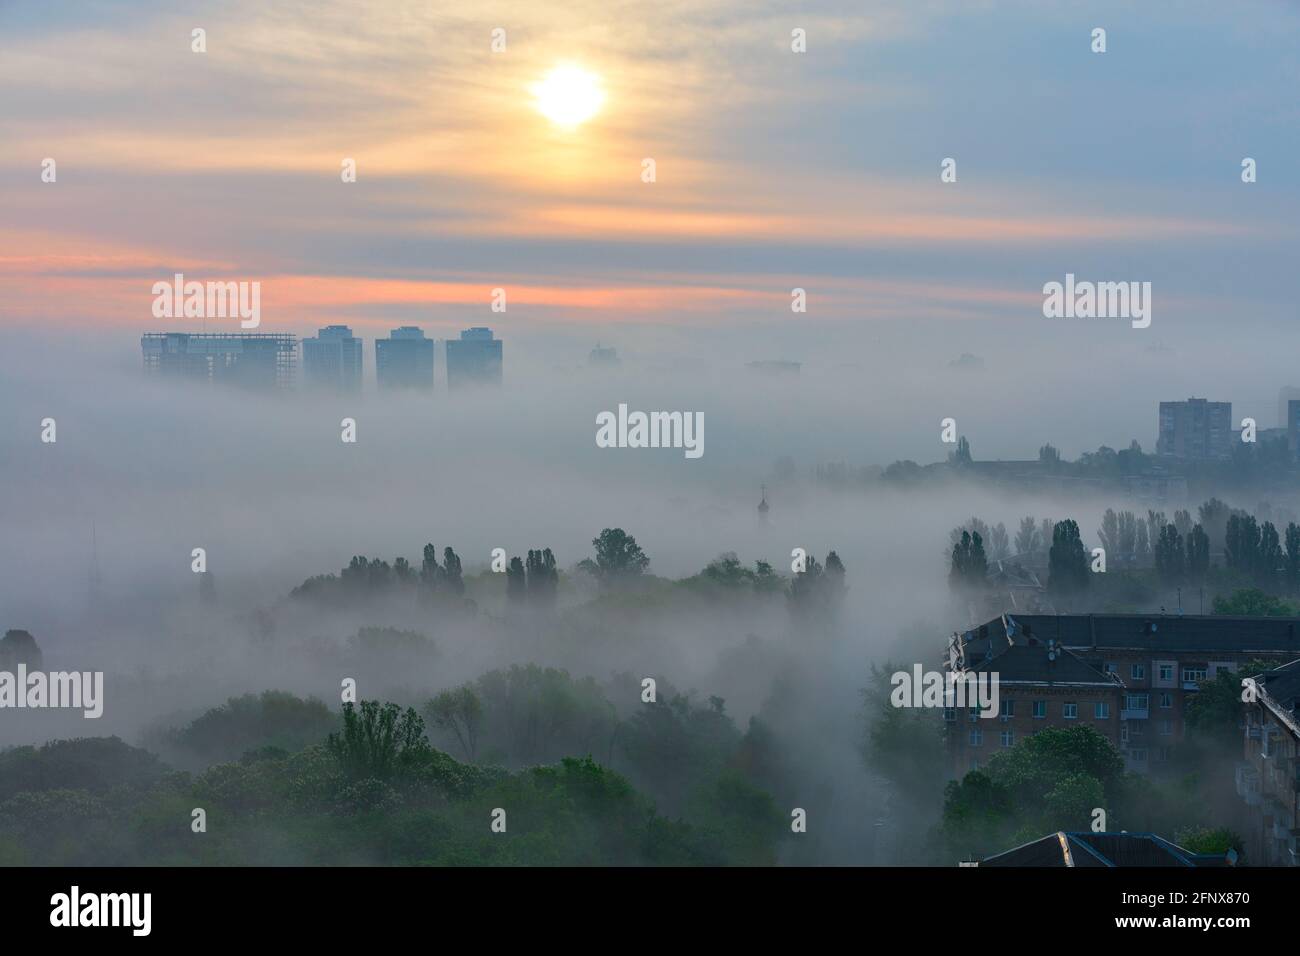 A thick fog, like a duvet, spreads early in the morning between the houses and trees of the city park in the soft touch of the rising sun. Stock Photo